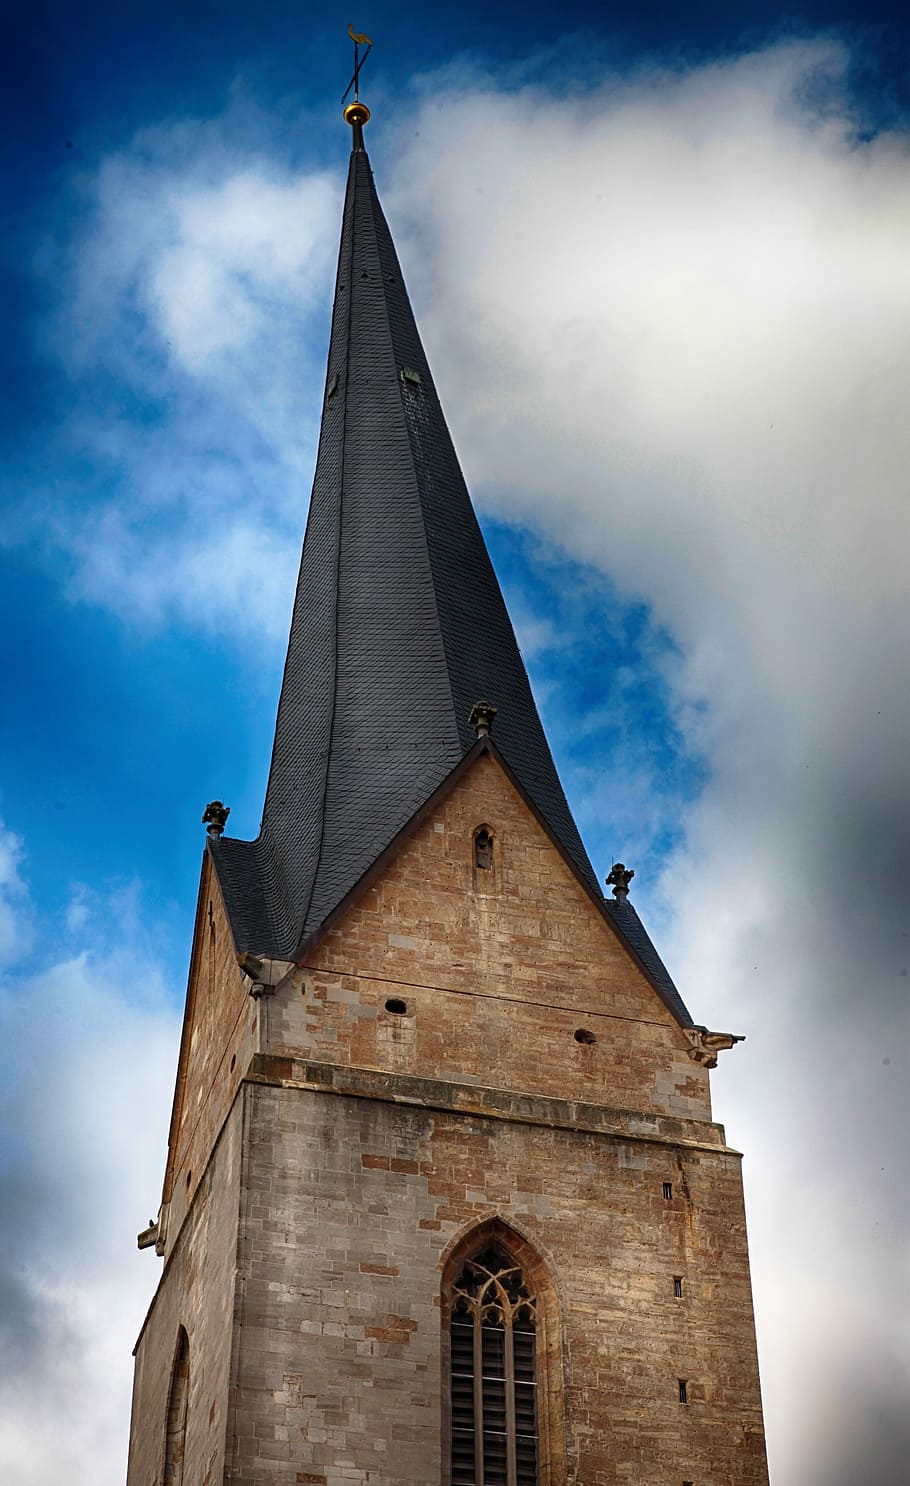 steeple, askew, inclined, spire, building, tower, roof construction, slate, church, great